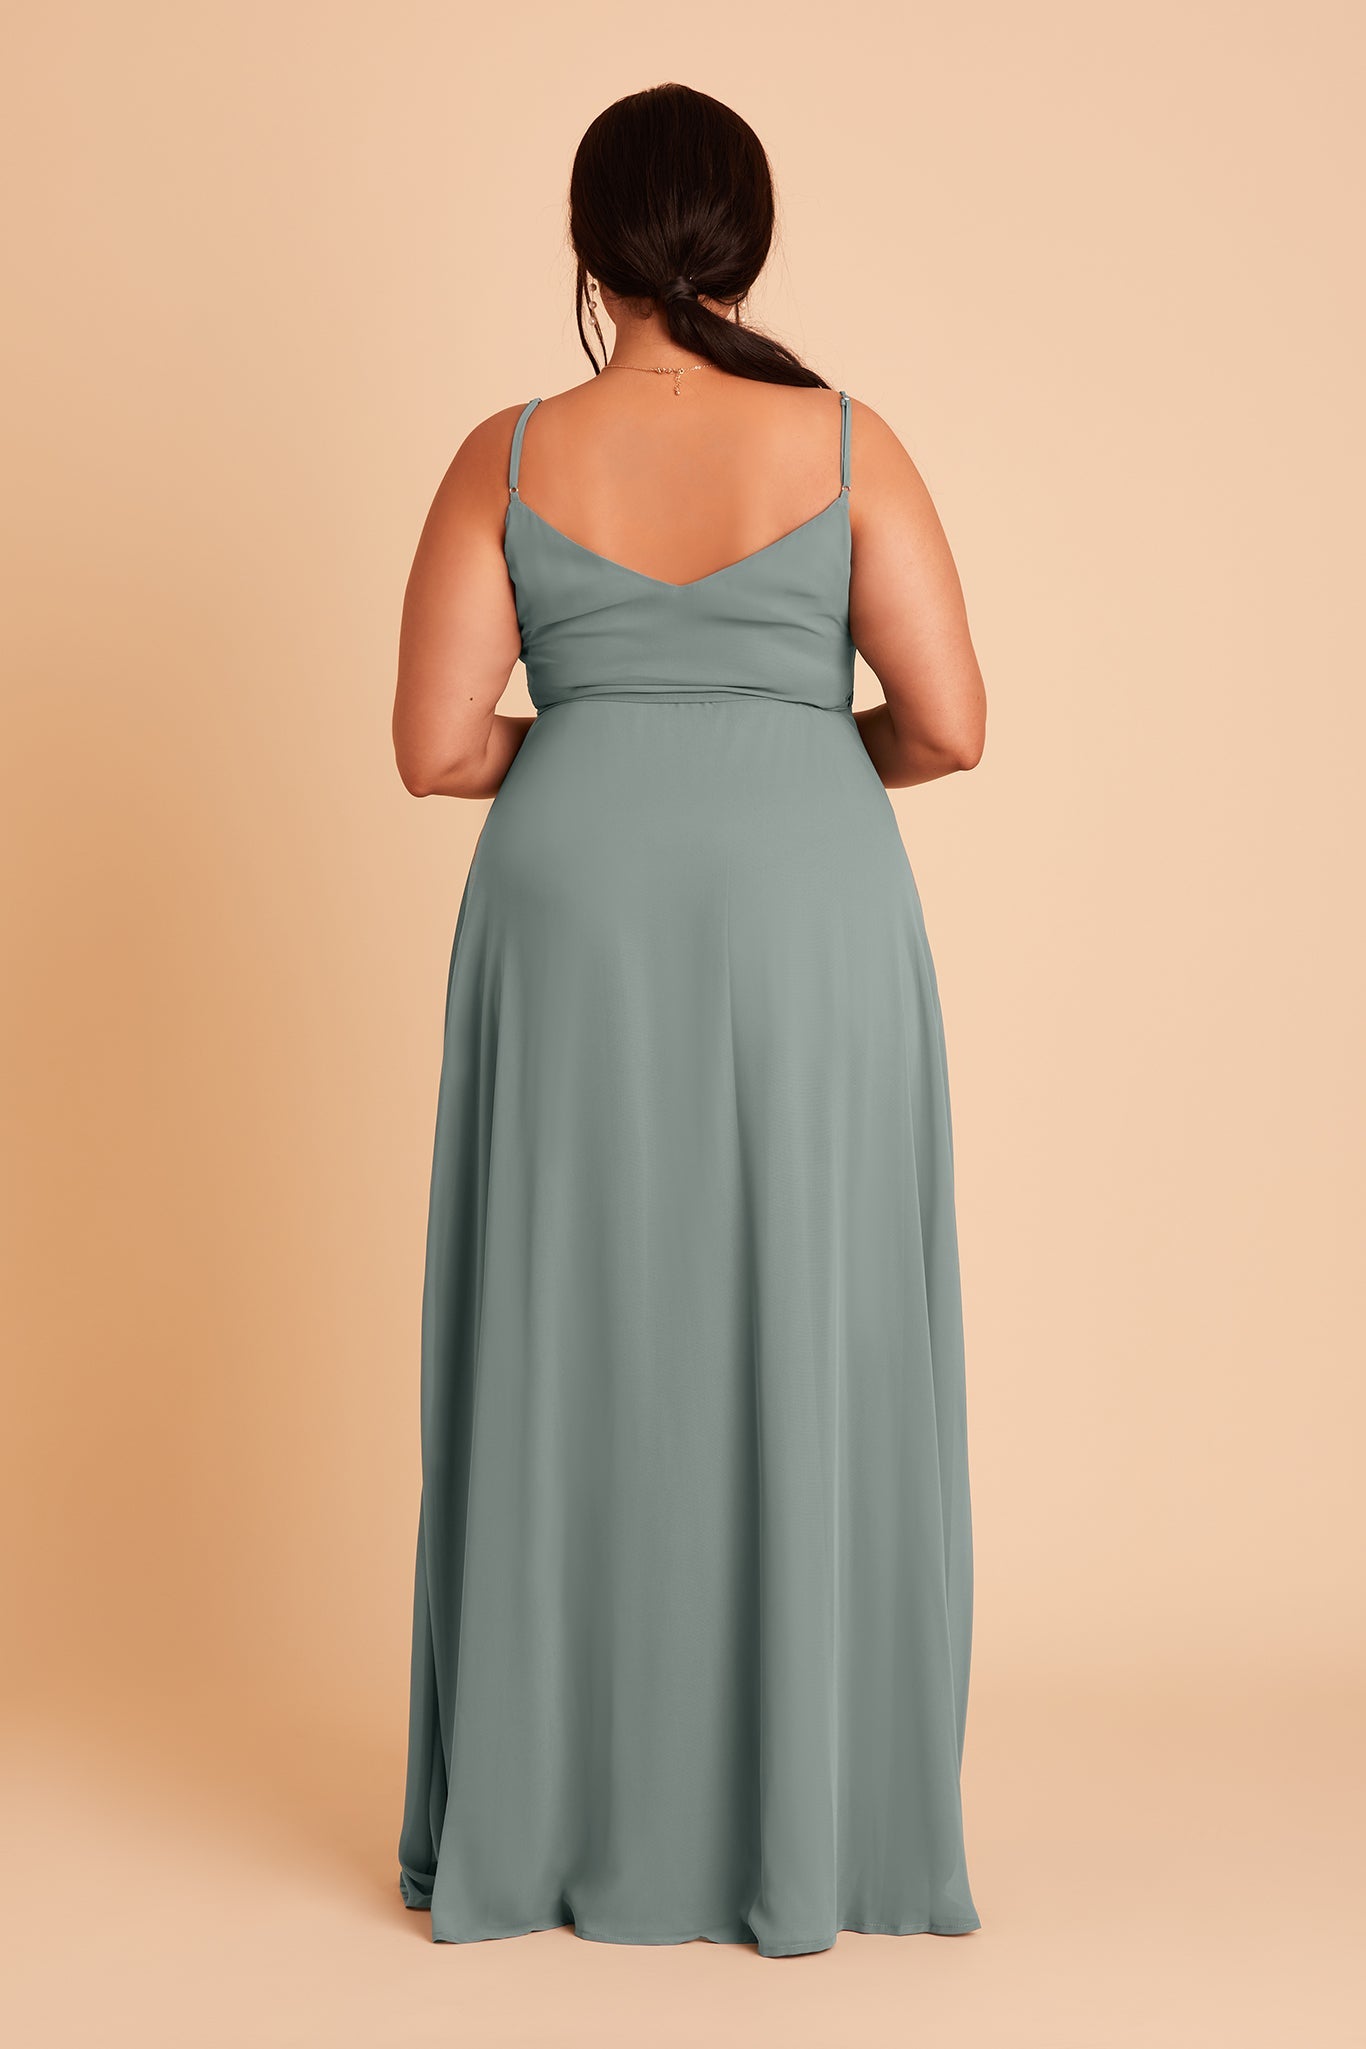 Cindy plus size bridesmaid dress with slit in sea glass chiffon by Birdy Grey, back view